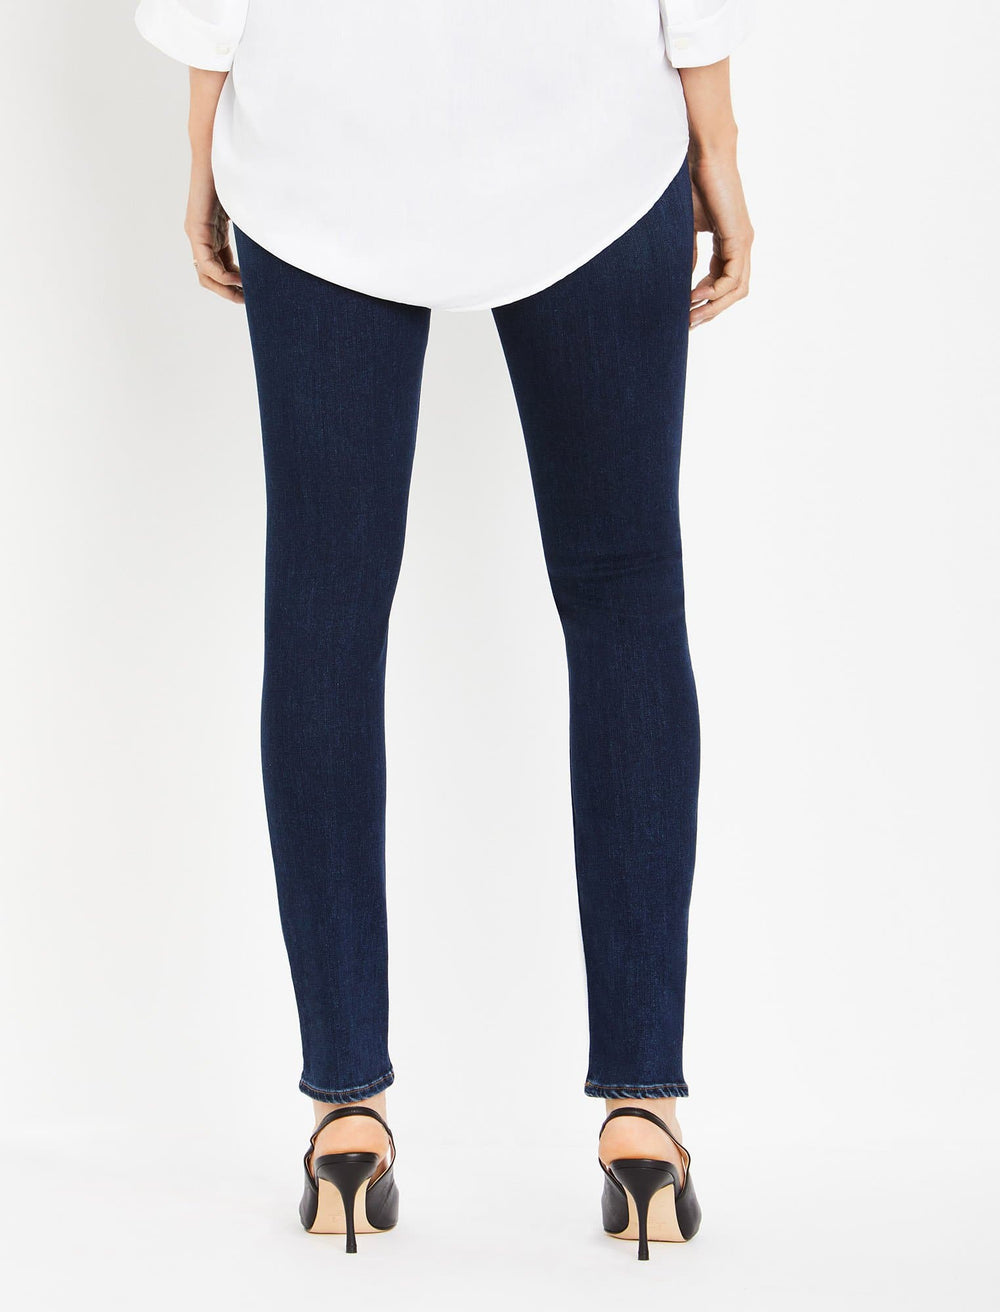 Coated Mama J Maternity Jeans by J BRAND for $40